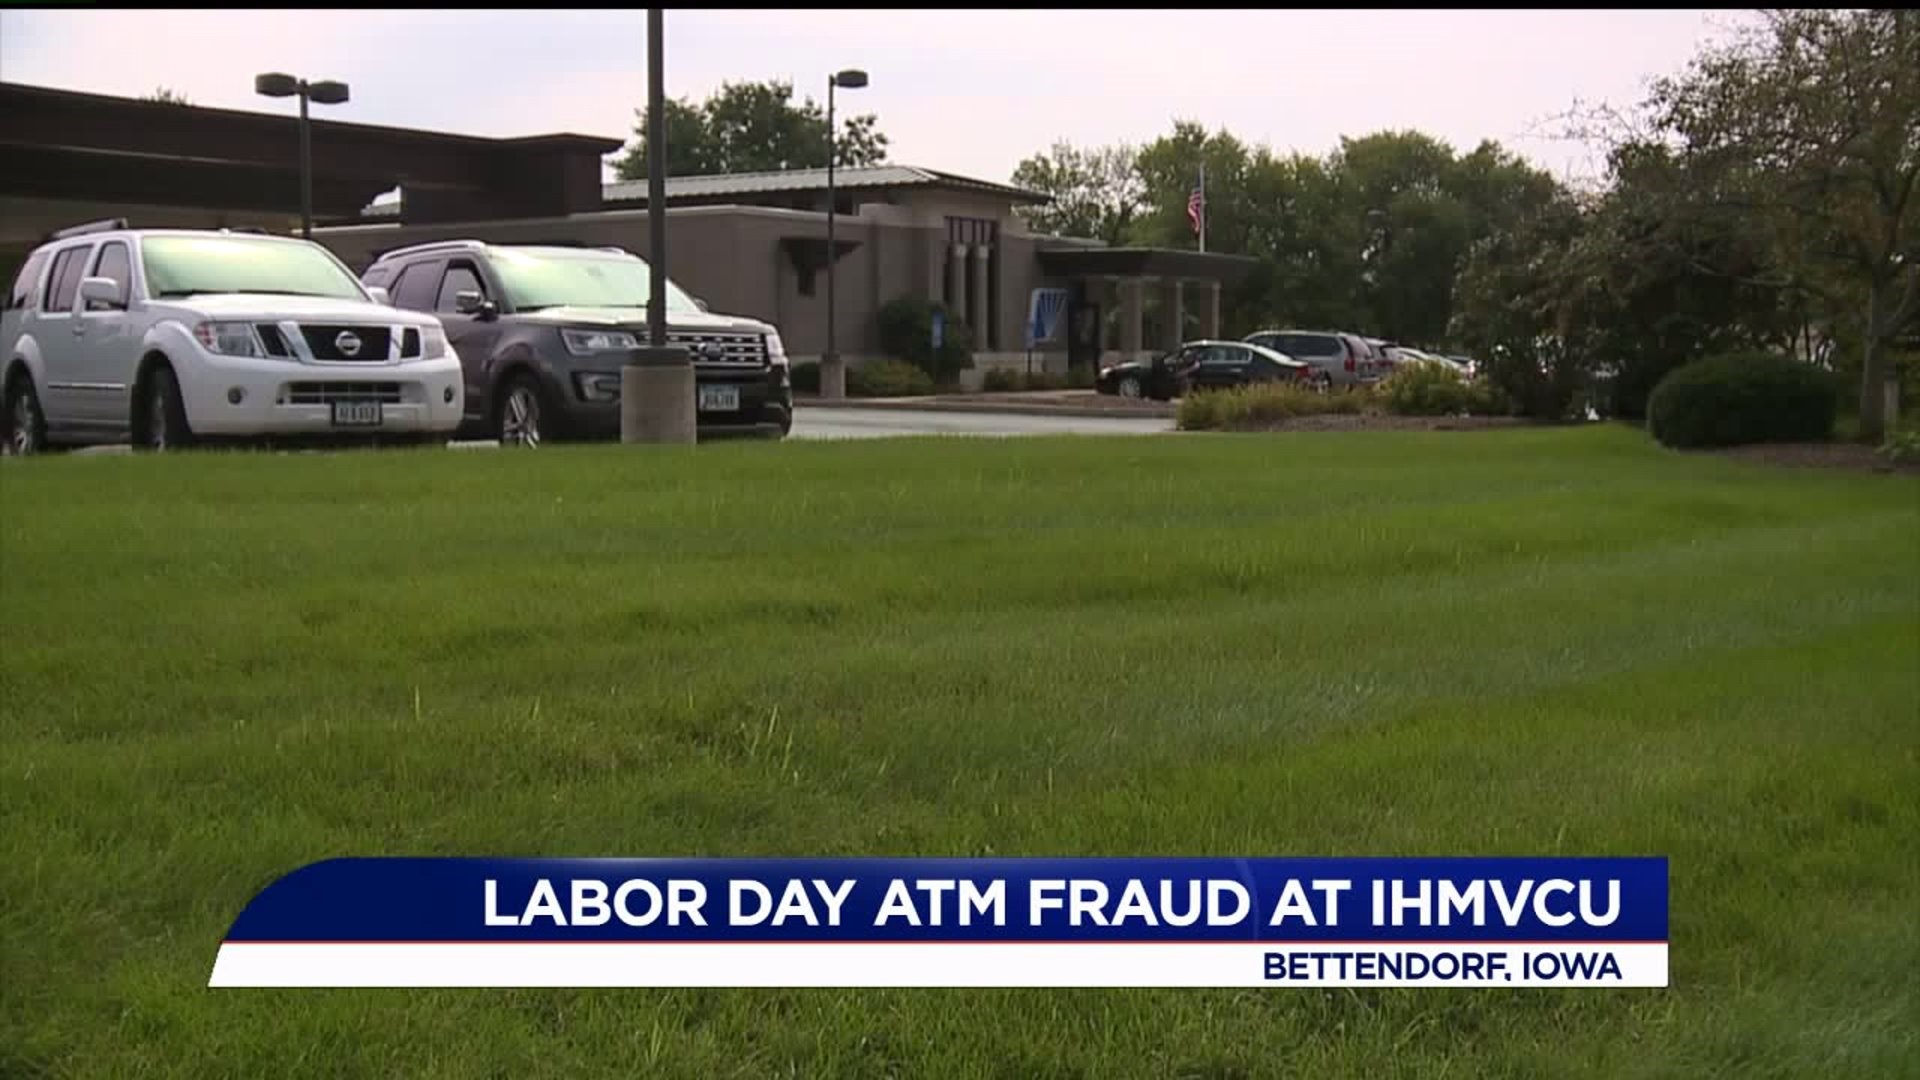 ATM fraud reported at IH Mississippi Valley Credit Union